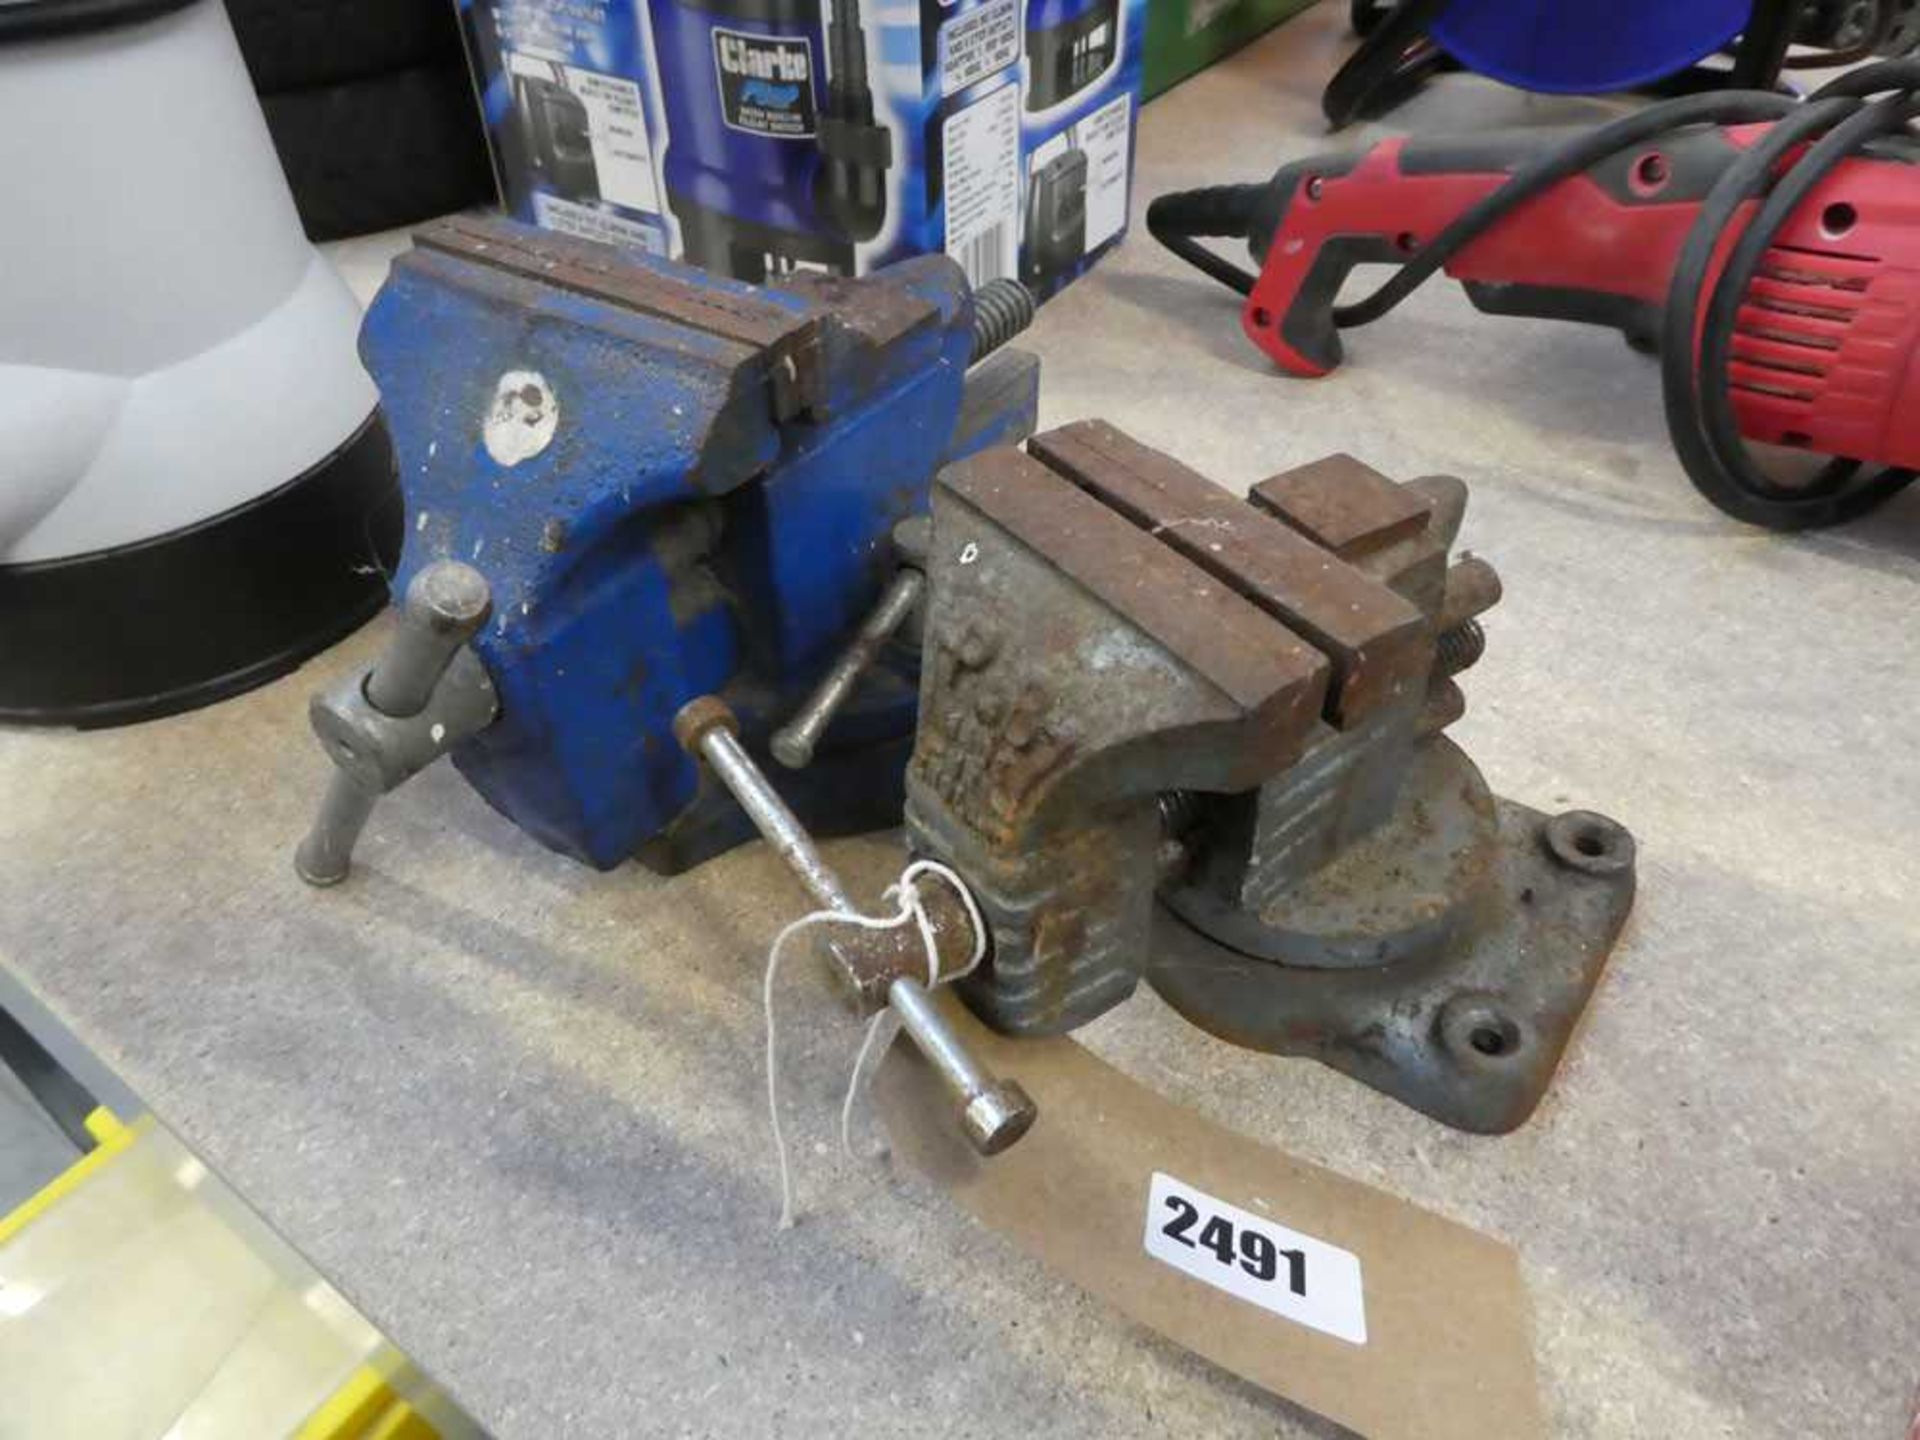 Pair of bench mounted vice